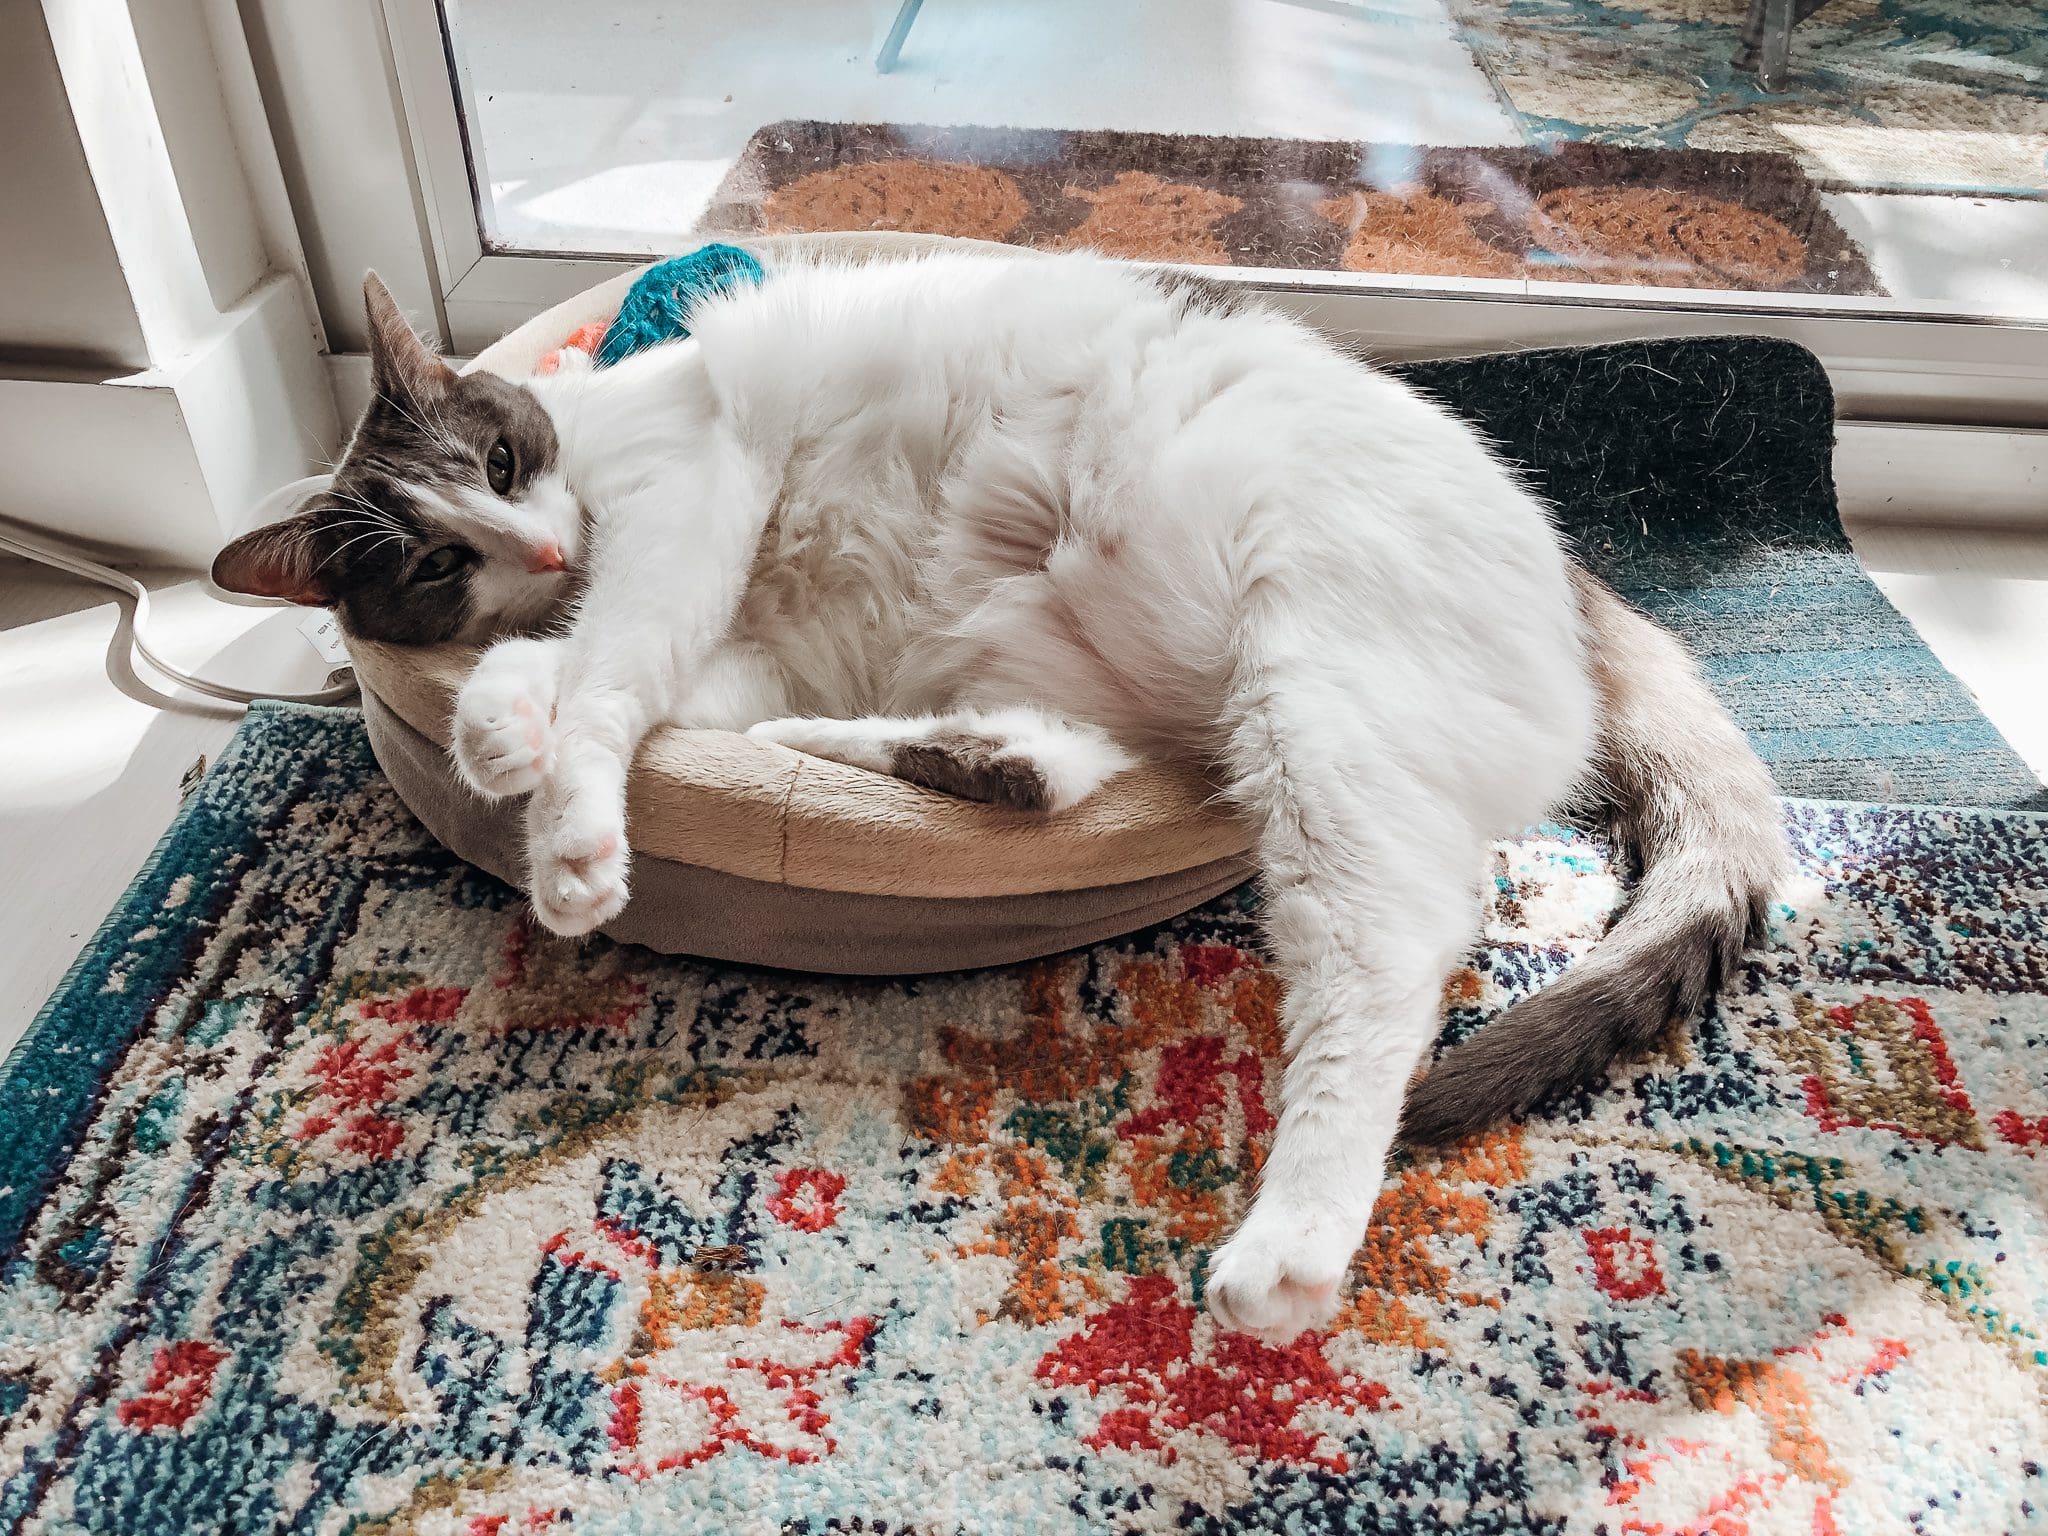 Emory on one of the best cat beds ever -- the heated bed from K&H Pet - cat beds that cats actually use